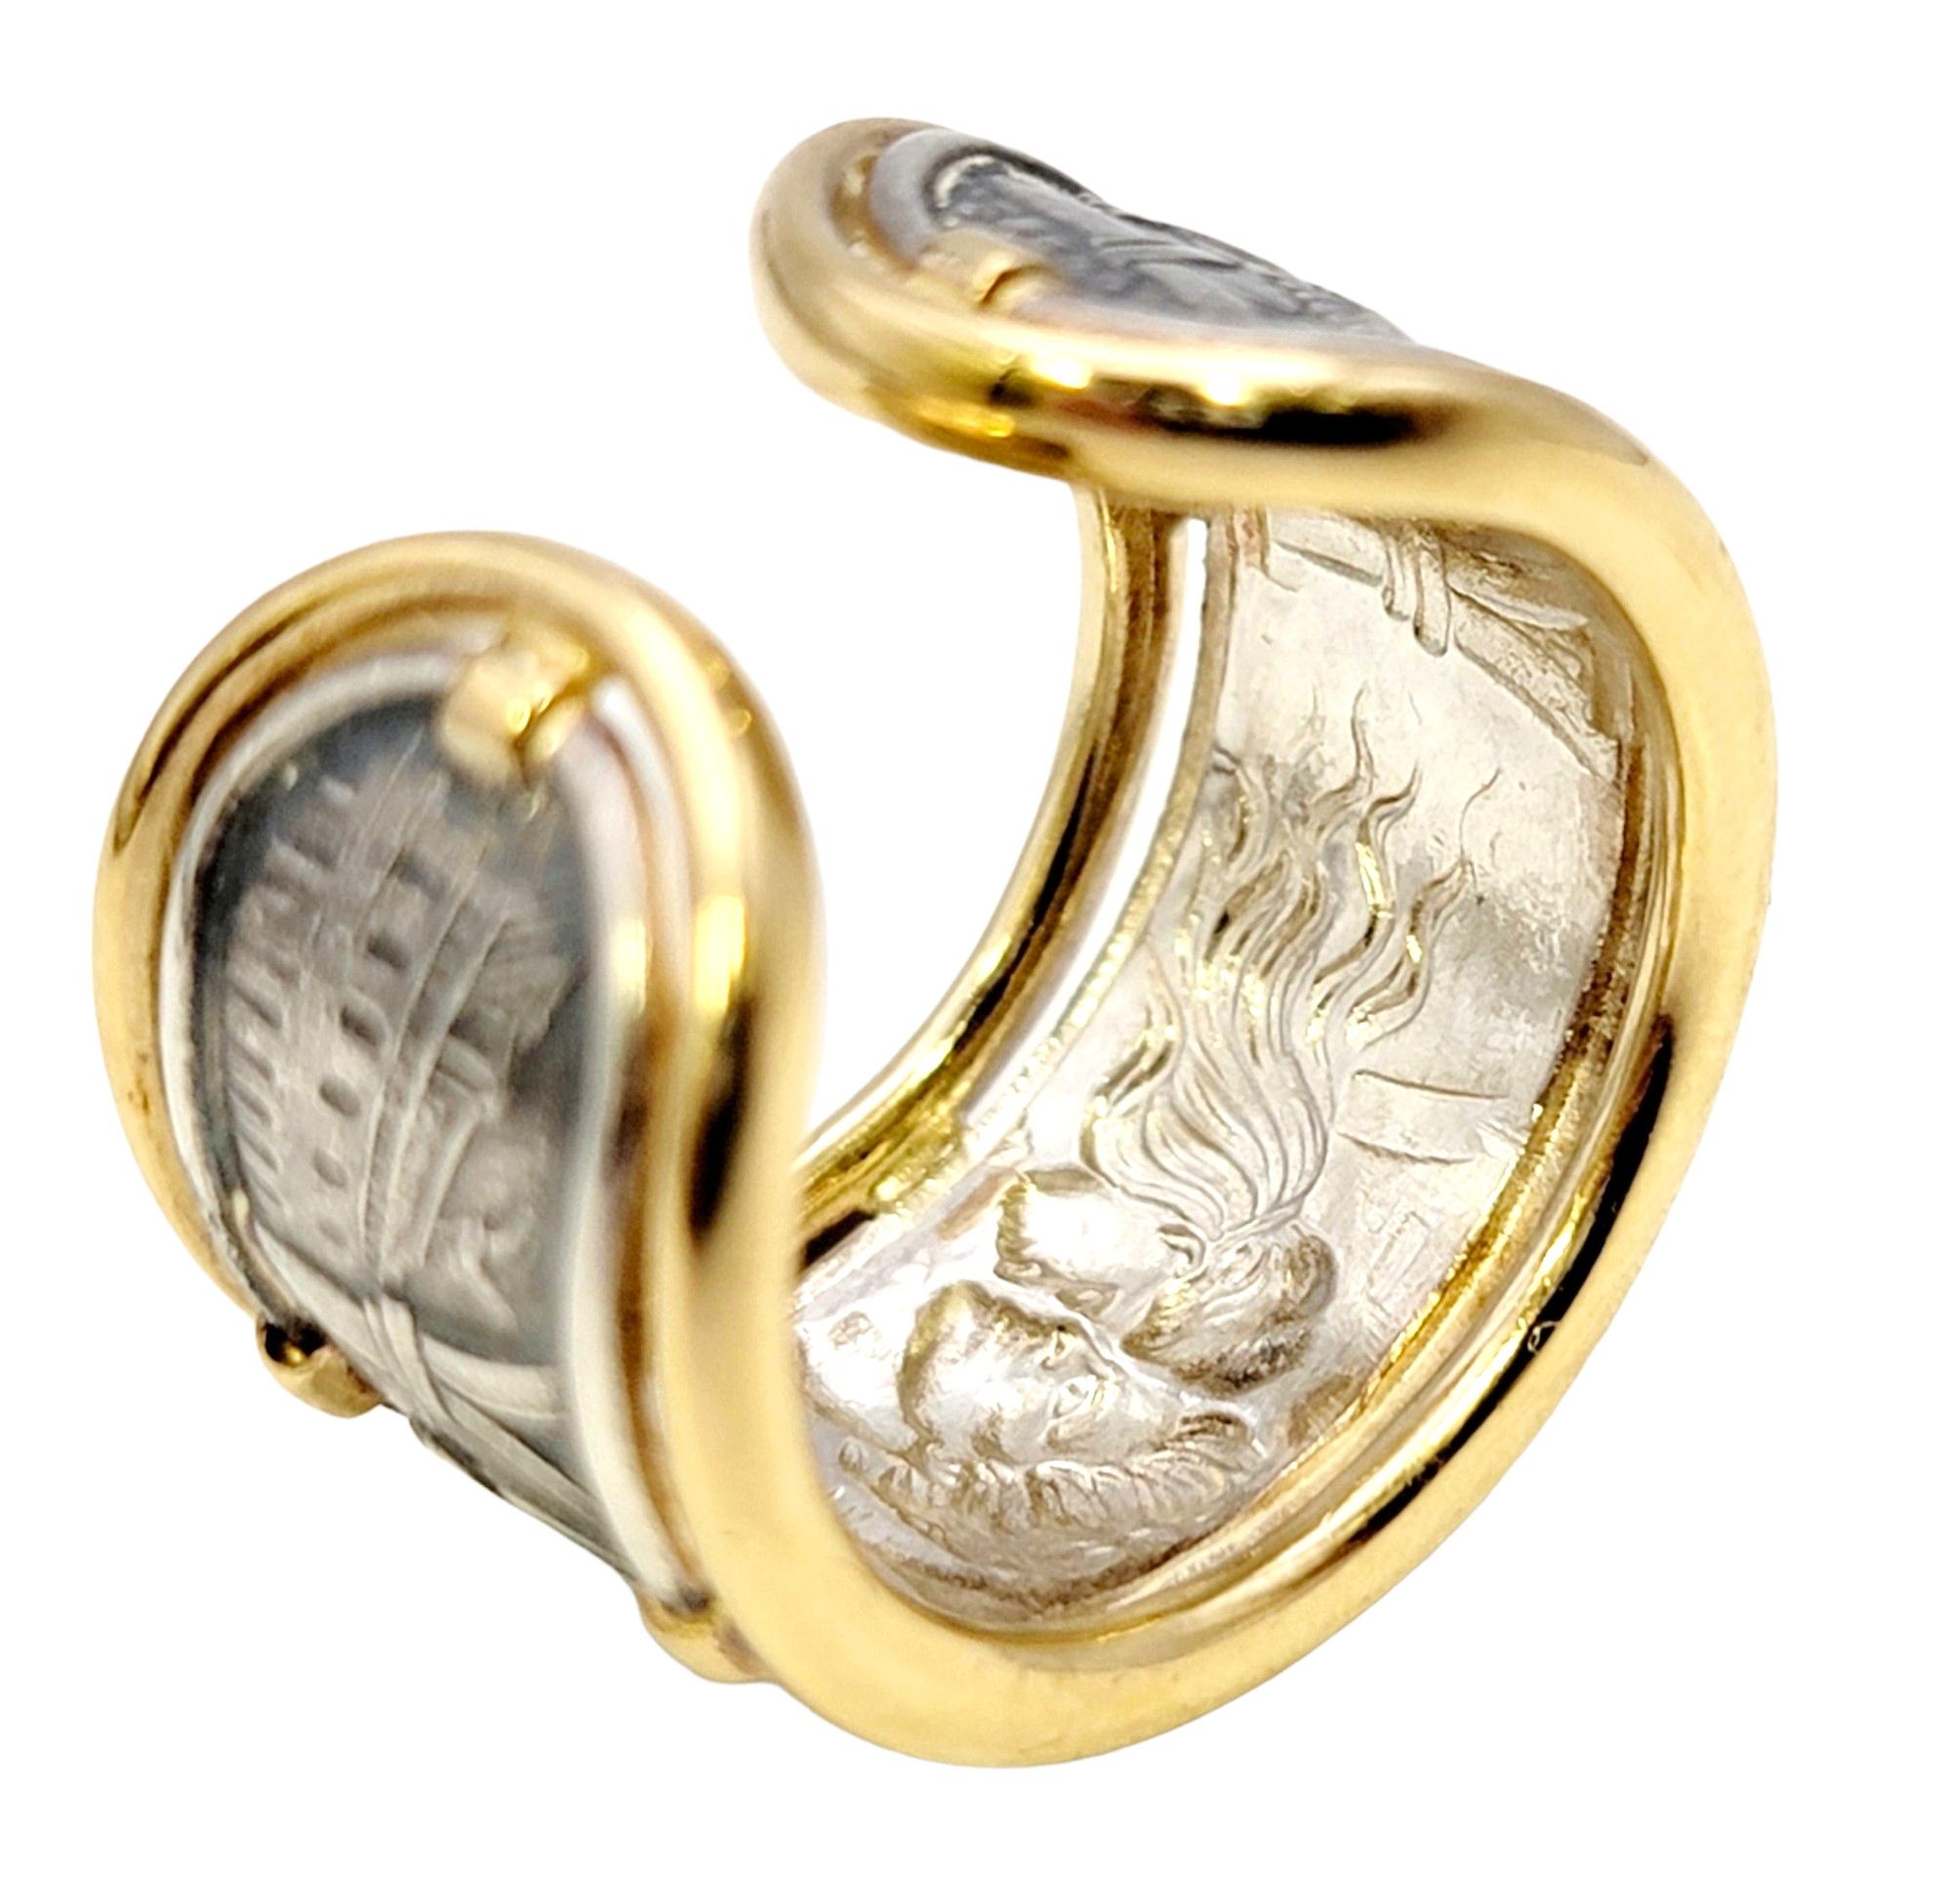 Carrera Y Carrera Romeo & Juliet Band Ring in Sterling Silver and Yellow Gold  1